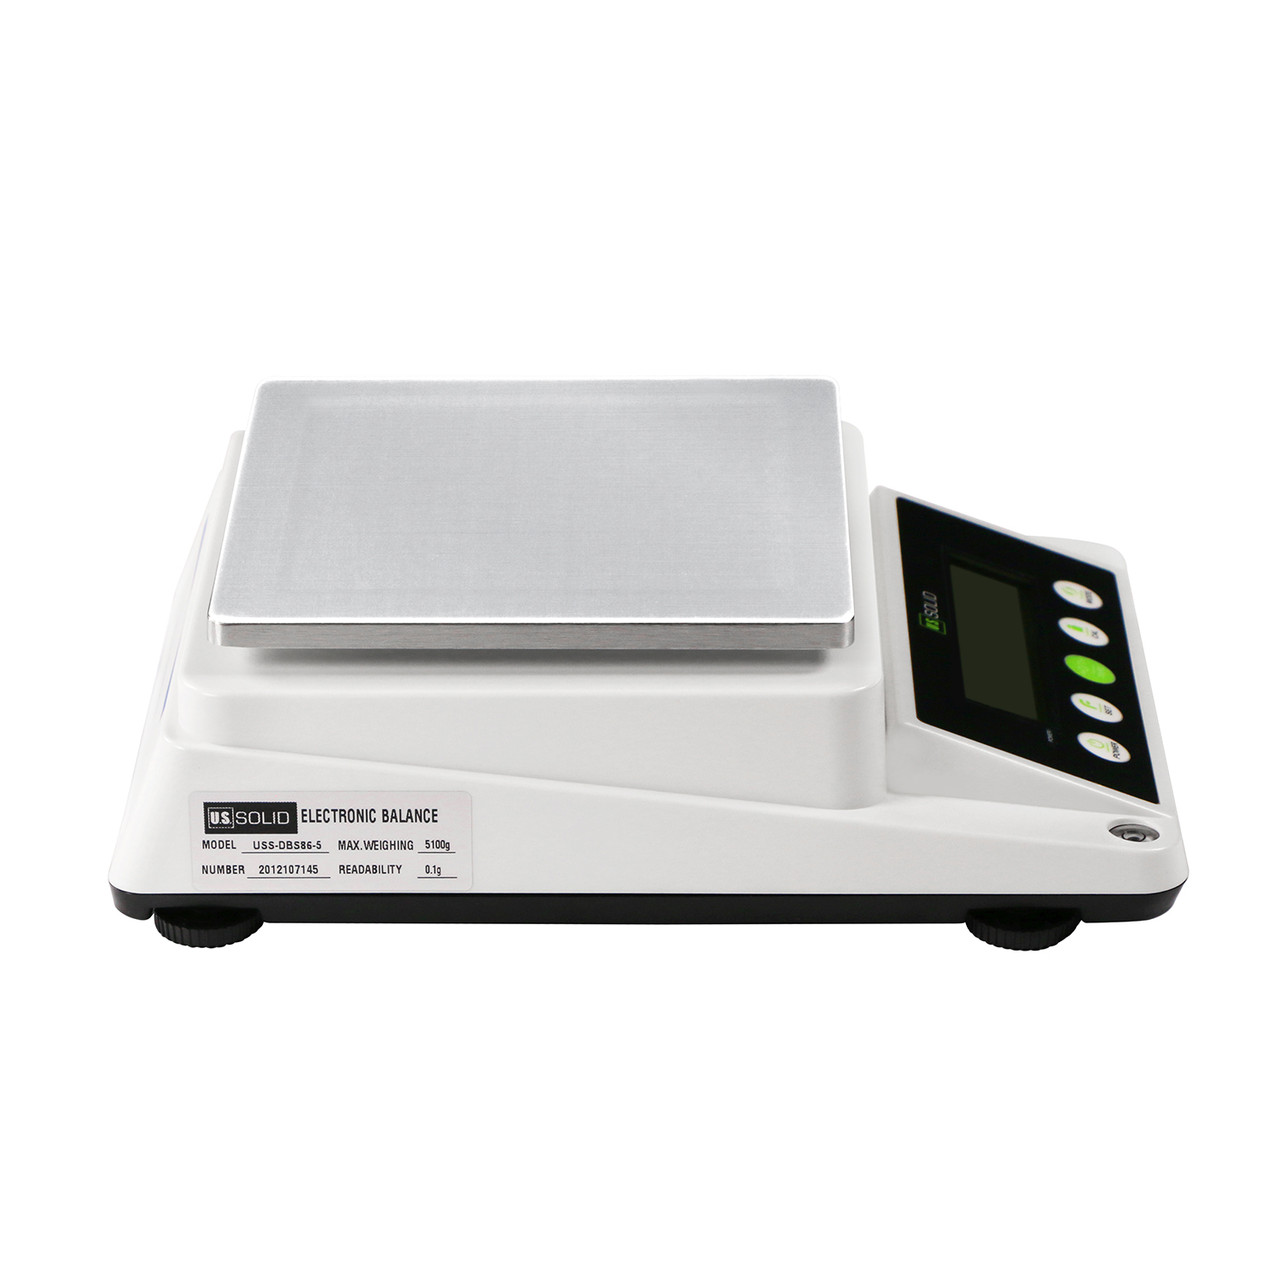 U.S. Solid 5100 G x 0.1 G Precision Balance – Digital Electronic Precision Scale with RS232, 5kg x 0.1g